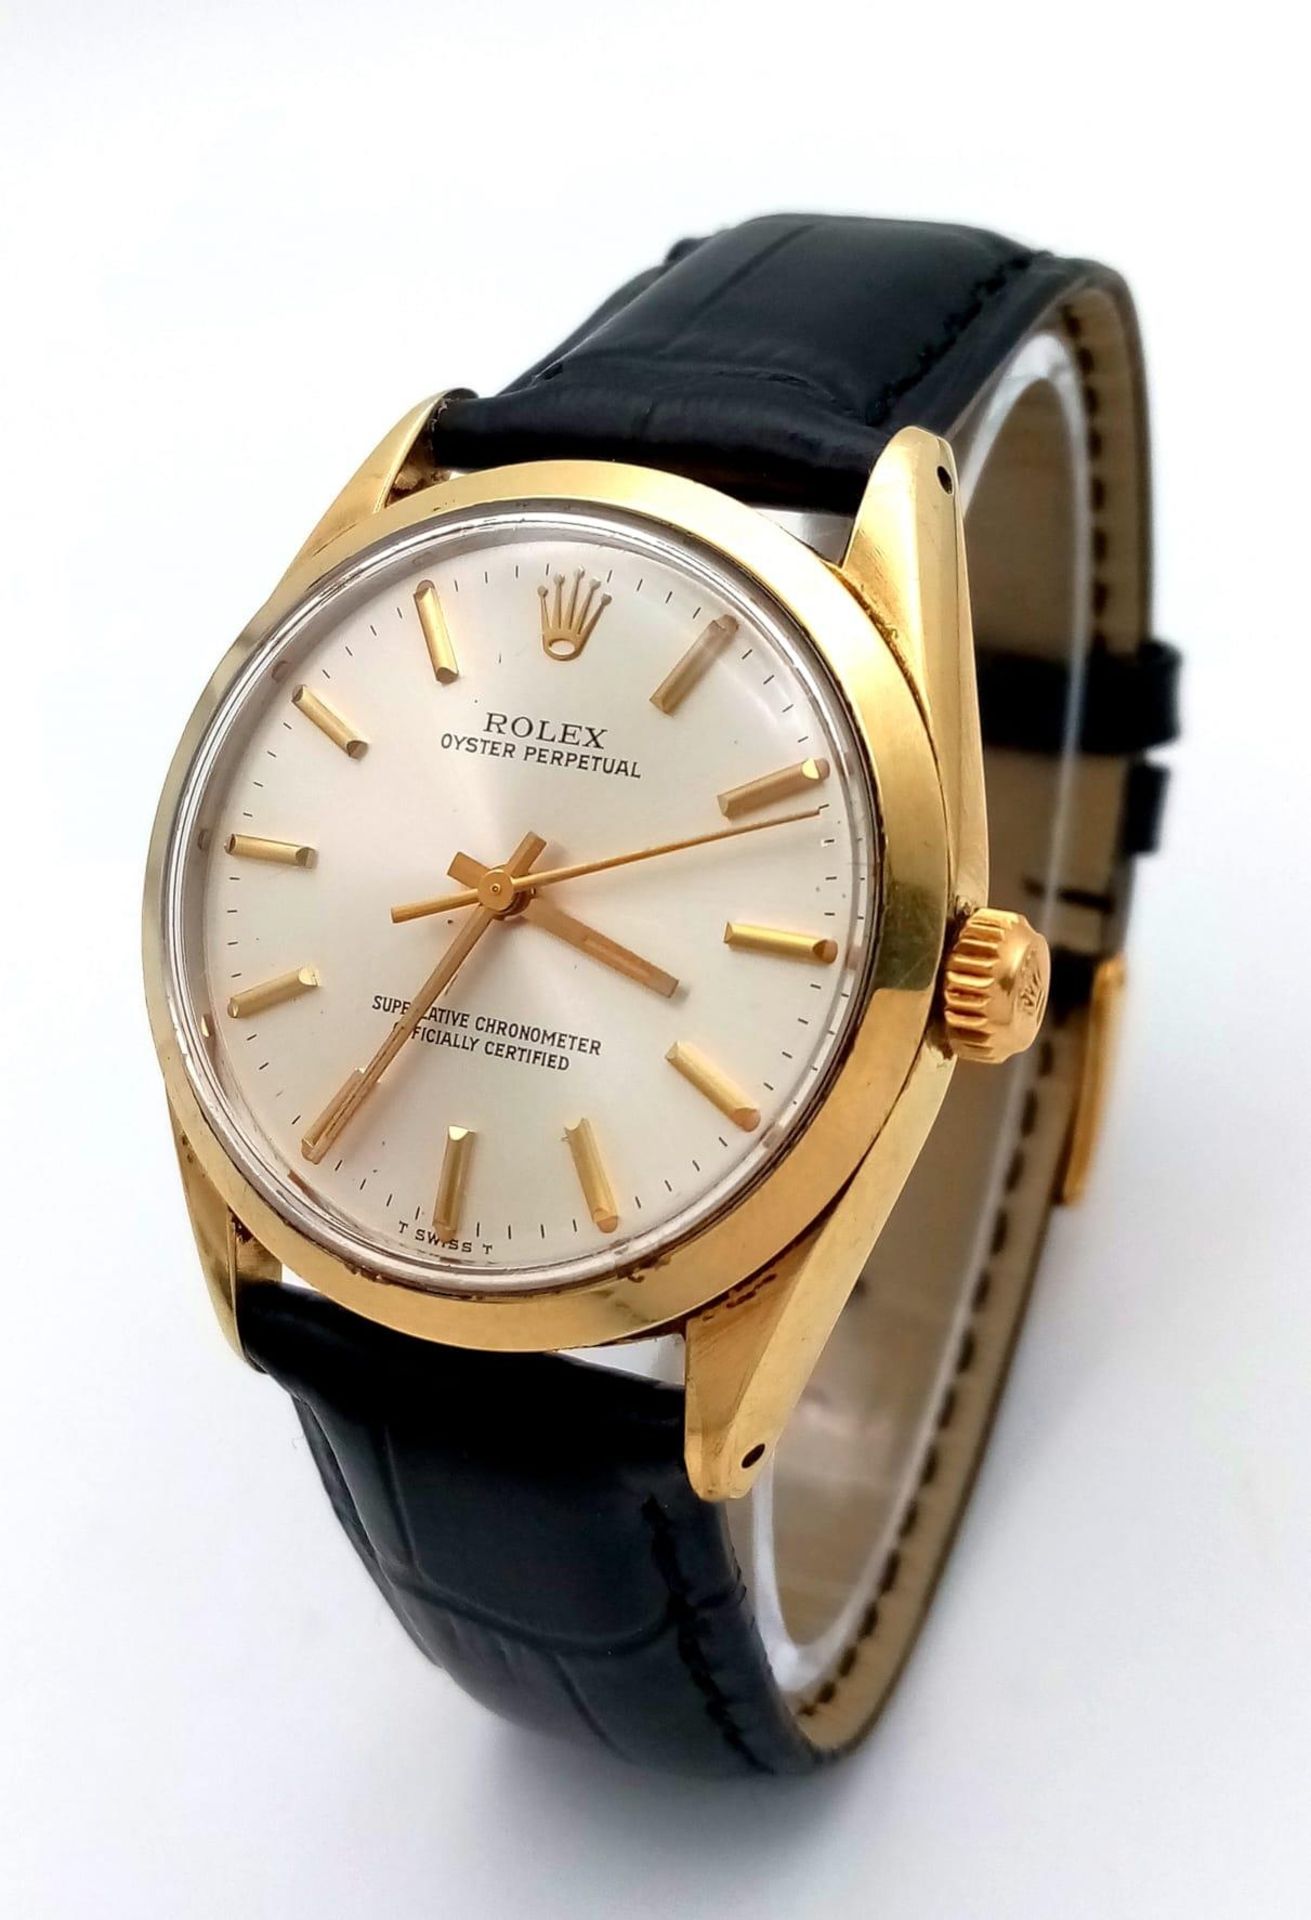 A VINTAGE ROLEX OYSTER PERPETUAL GENTS WATCH ON THE ORIGINAL ROLEX BLACK LEATHER STRAP ONLY WORN A - Image 2 of 9